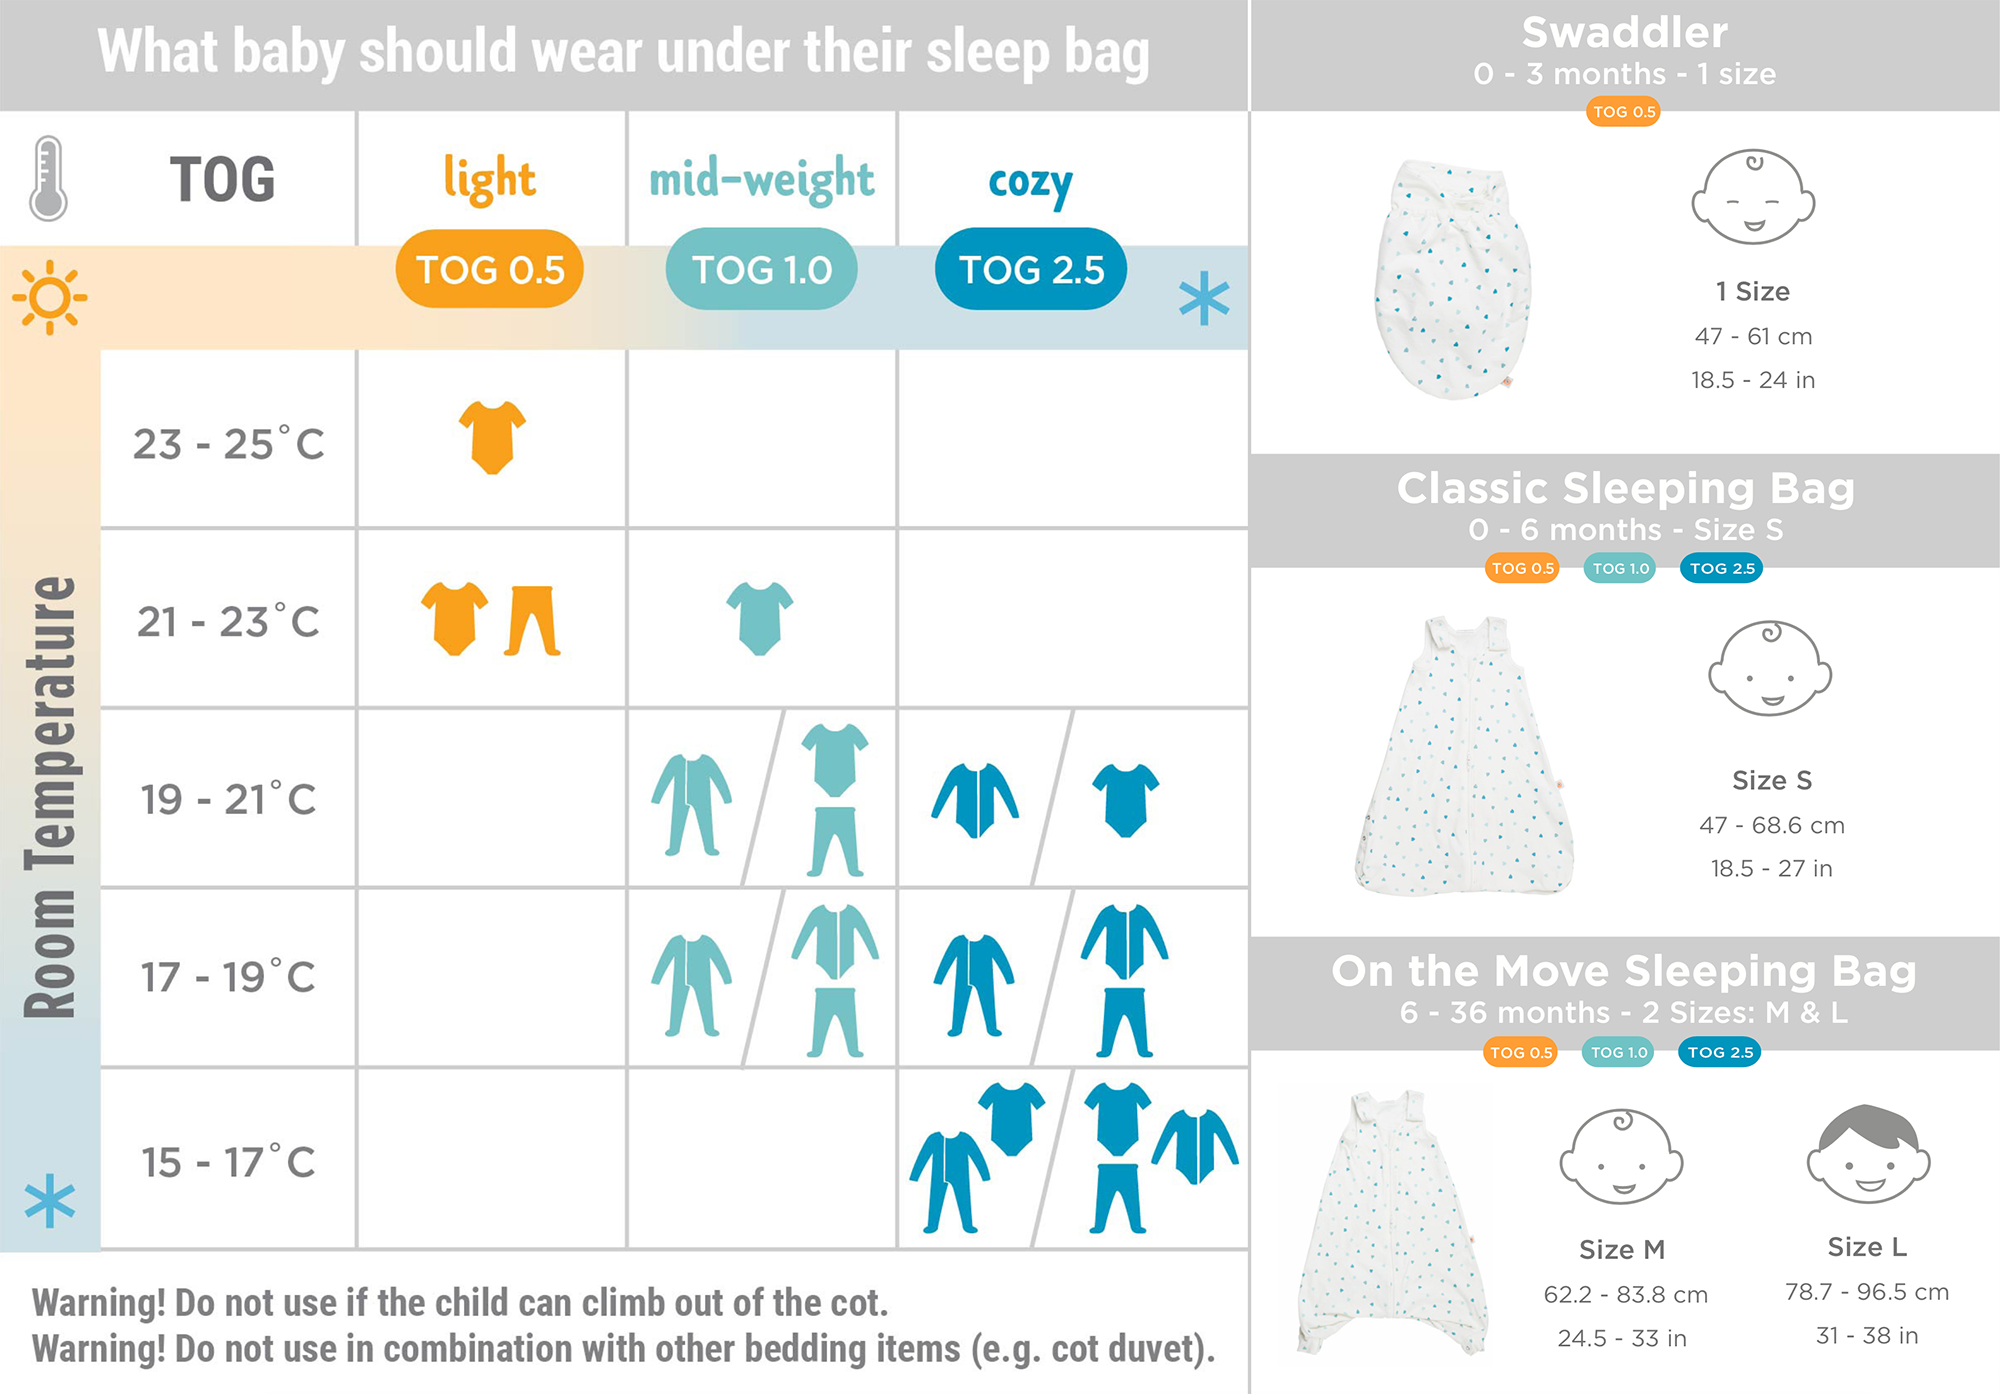 How to Dress Your Baby for Sleeping in 